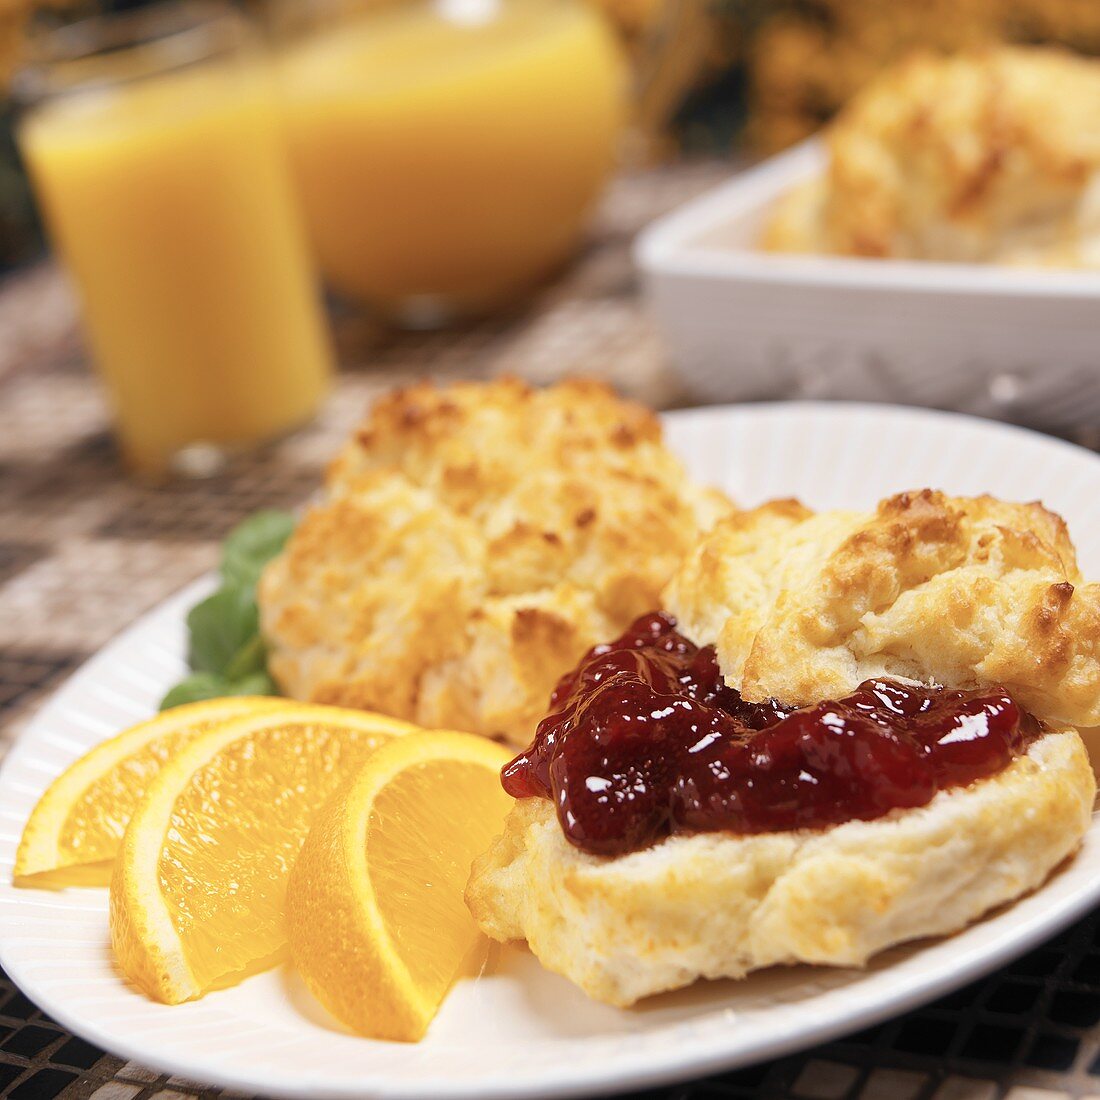 A Biscuit with Strawberry Jam and Orange Slices